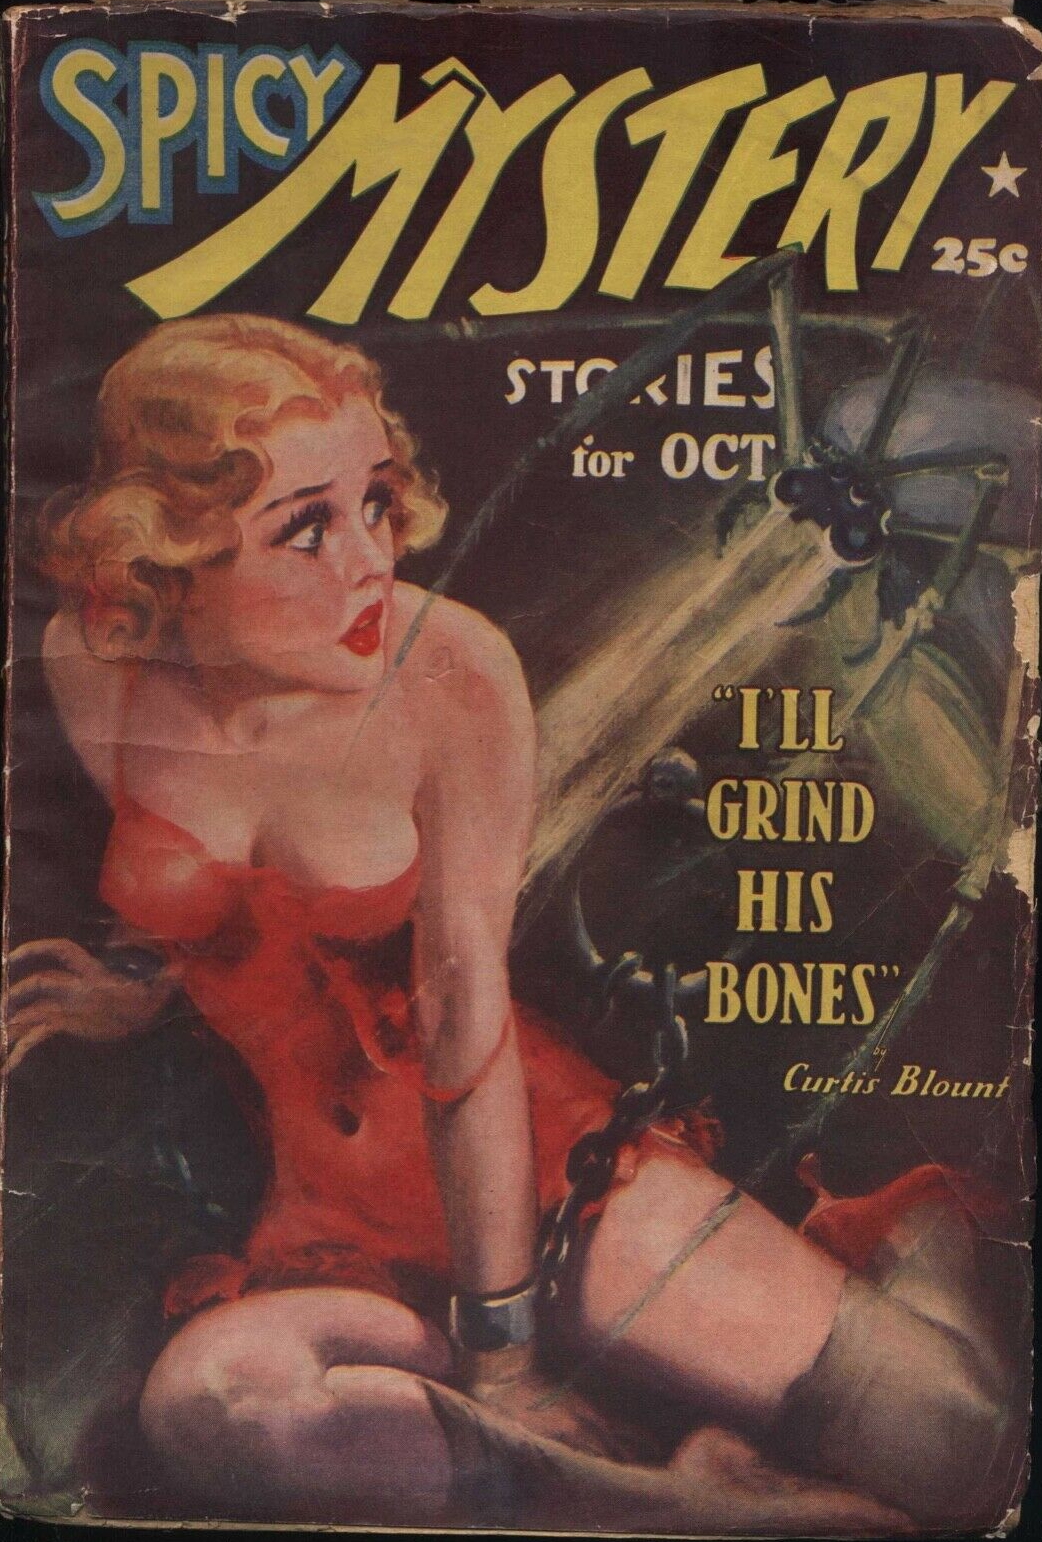 Spicy Mystery - October 1937